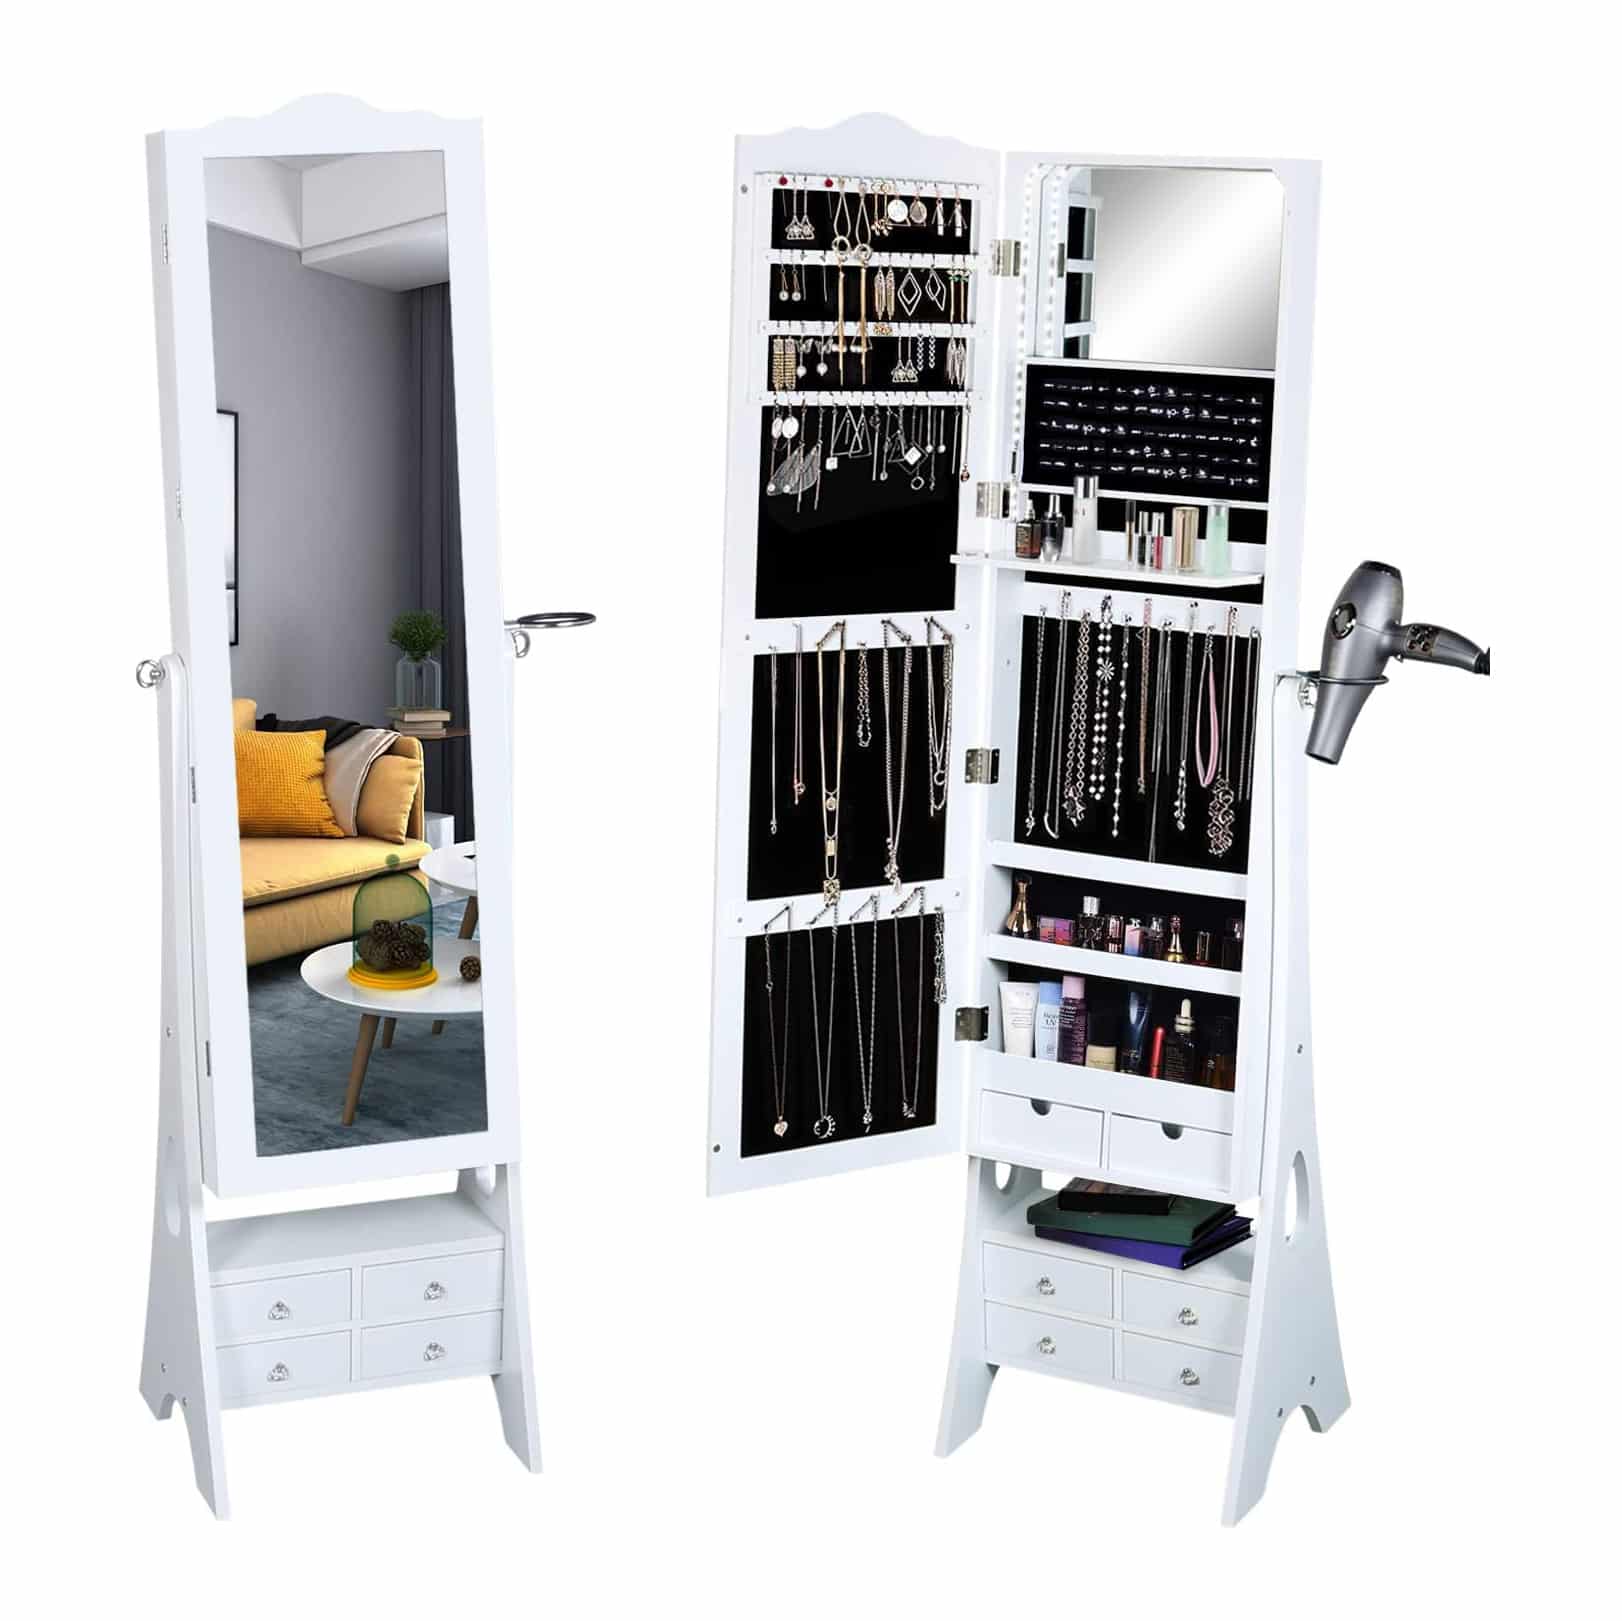 Top 10 Best Jewelry Cabinets in 2022 Reviews - Show Guide Me